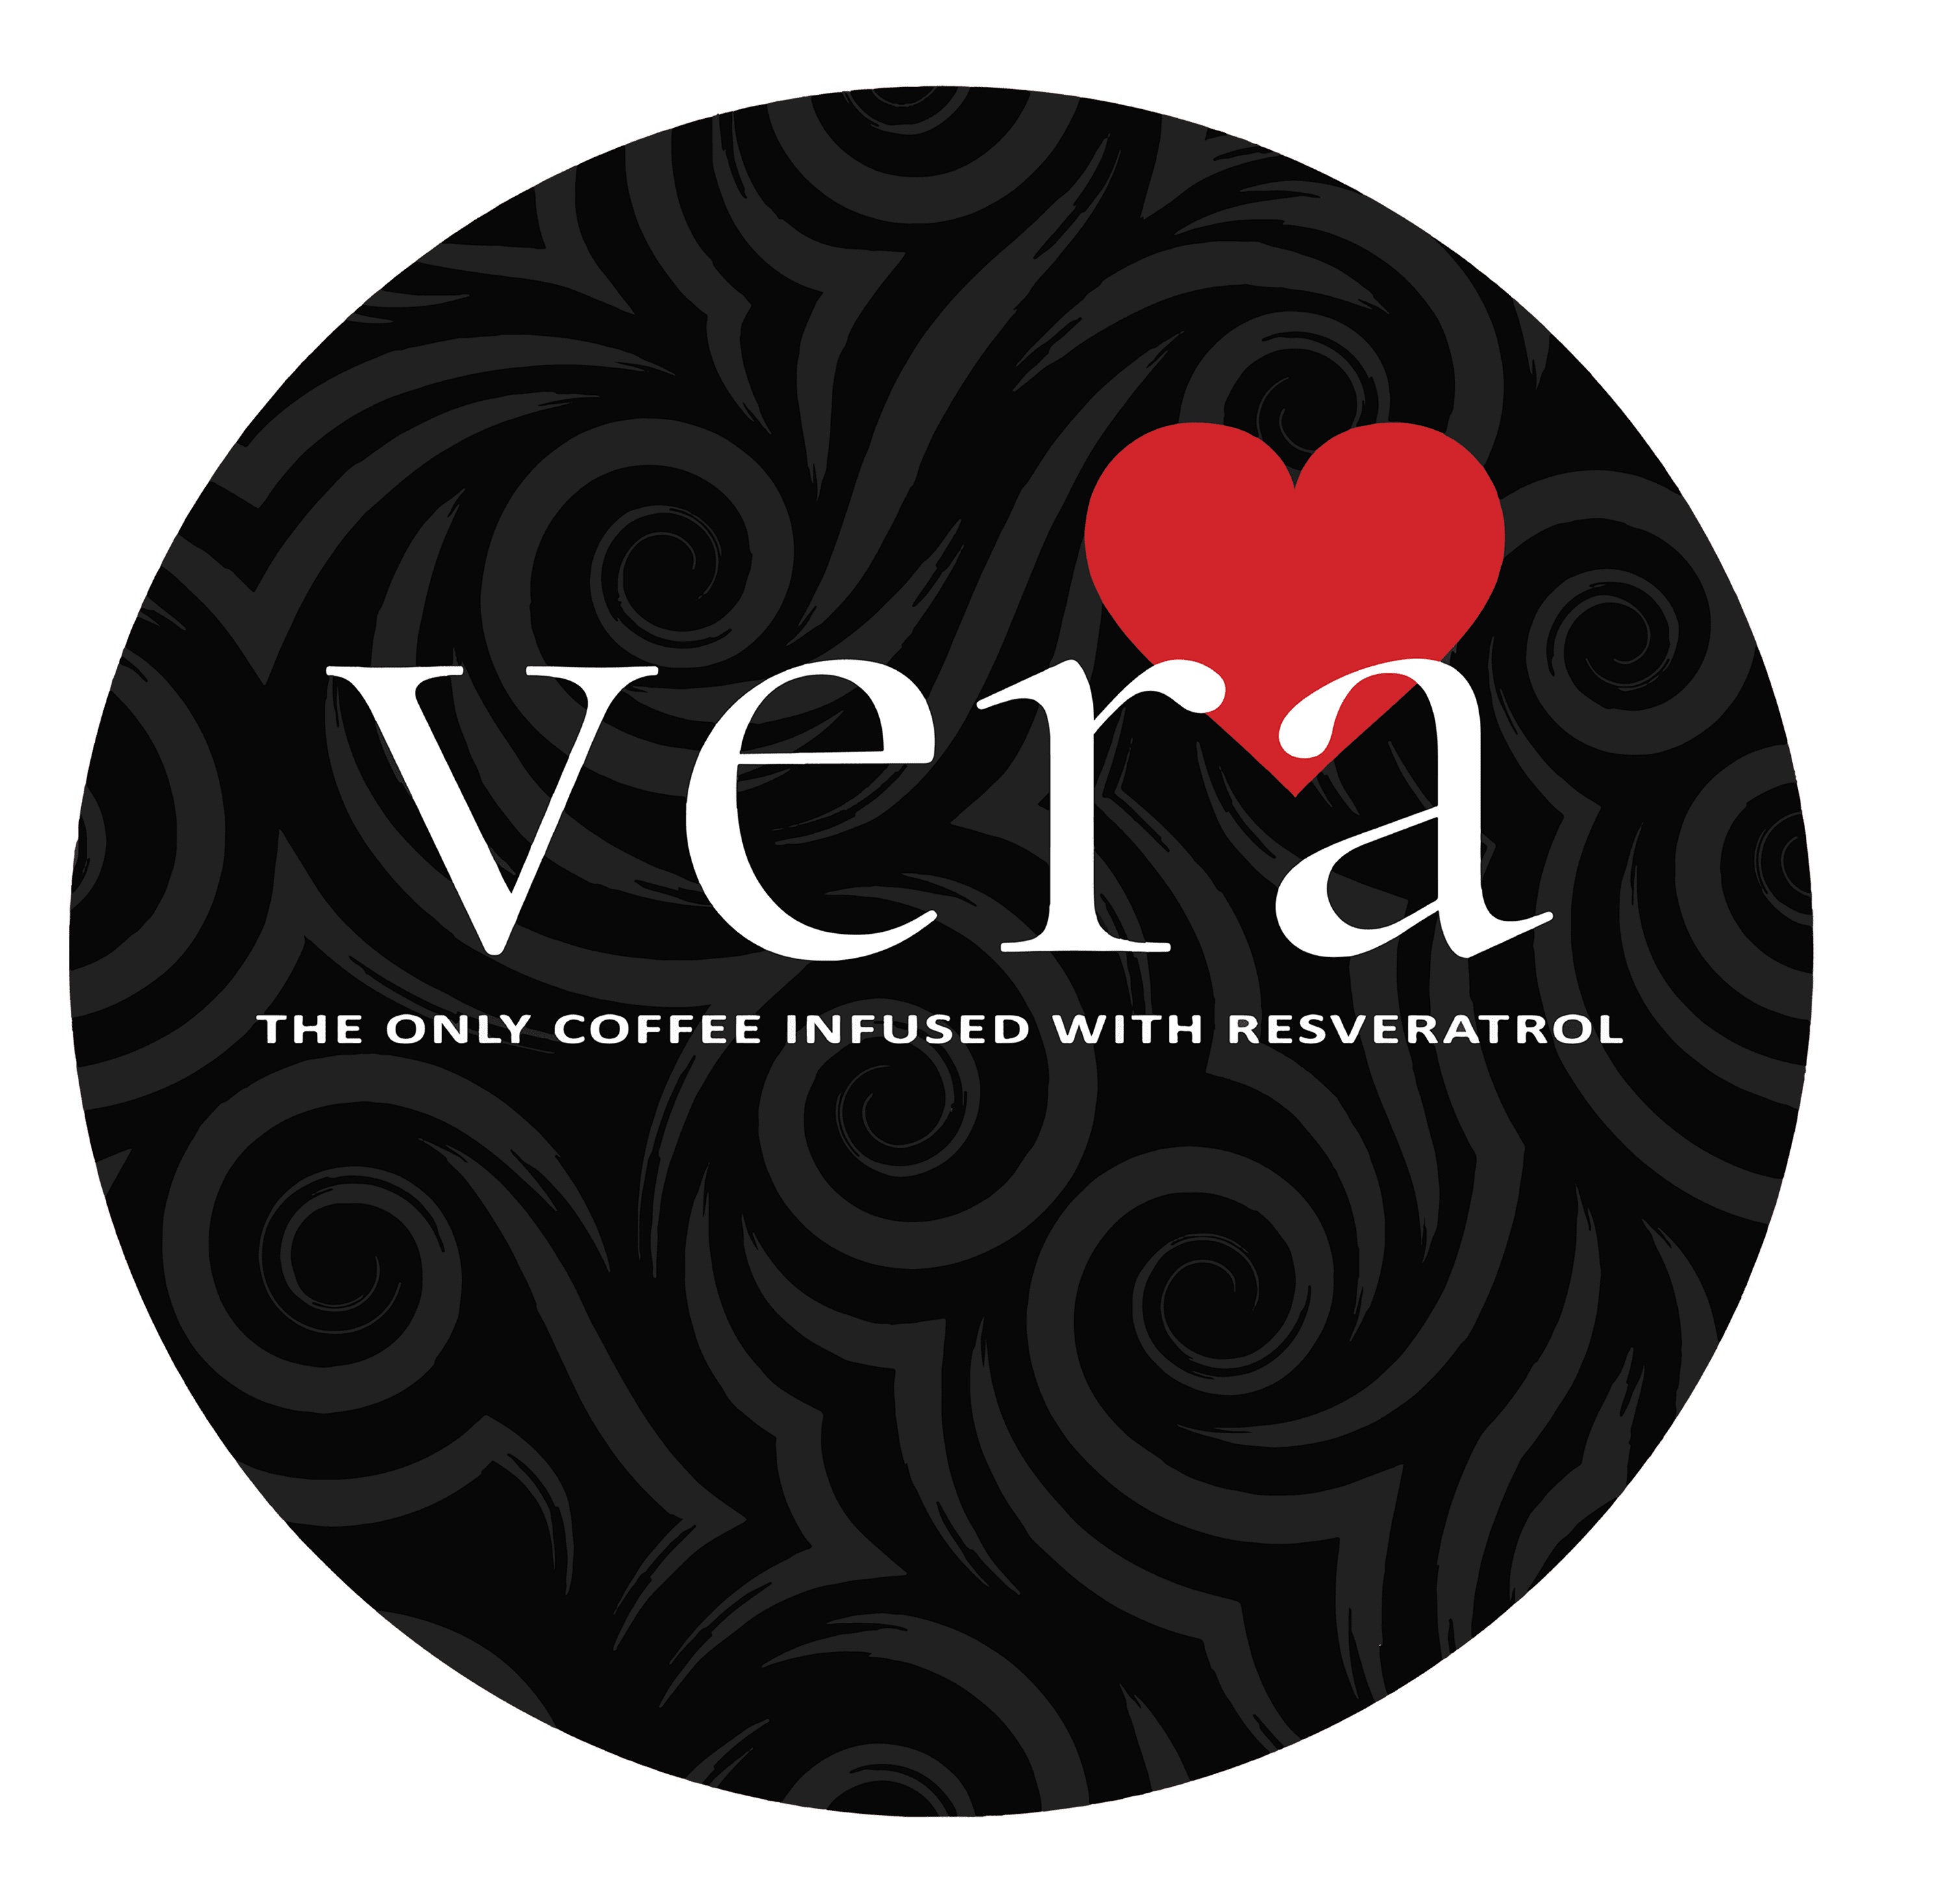 Vera roasting co, the only coffee infused with resveratrol, coffee near me, ice coffee, cold brew, calm blend, immunity blend, cardio blend